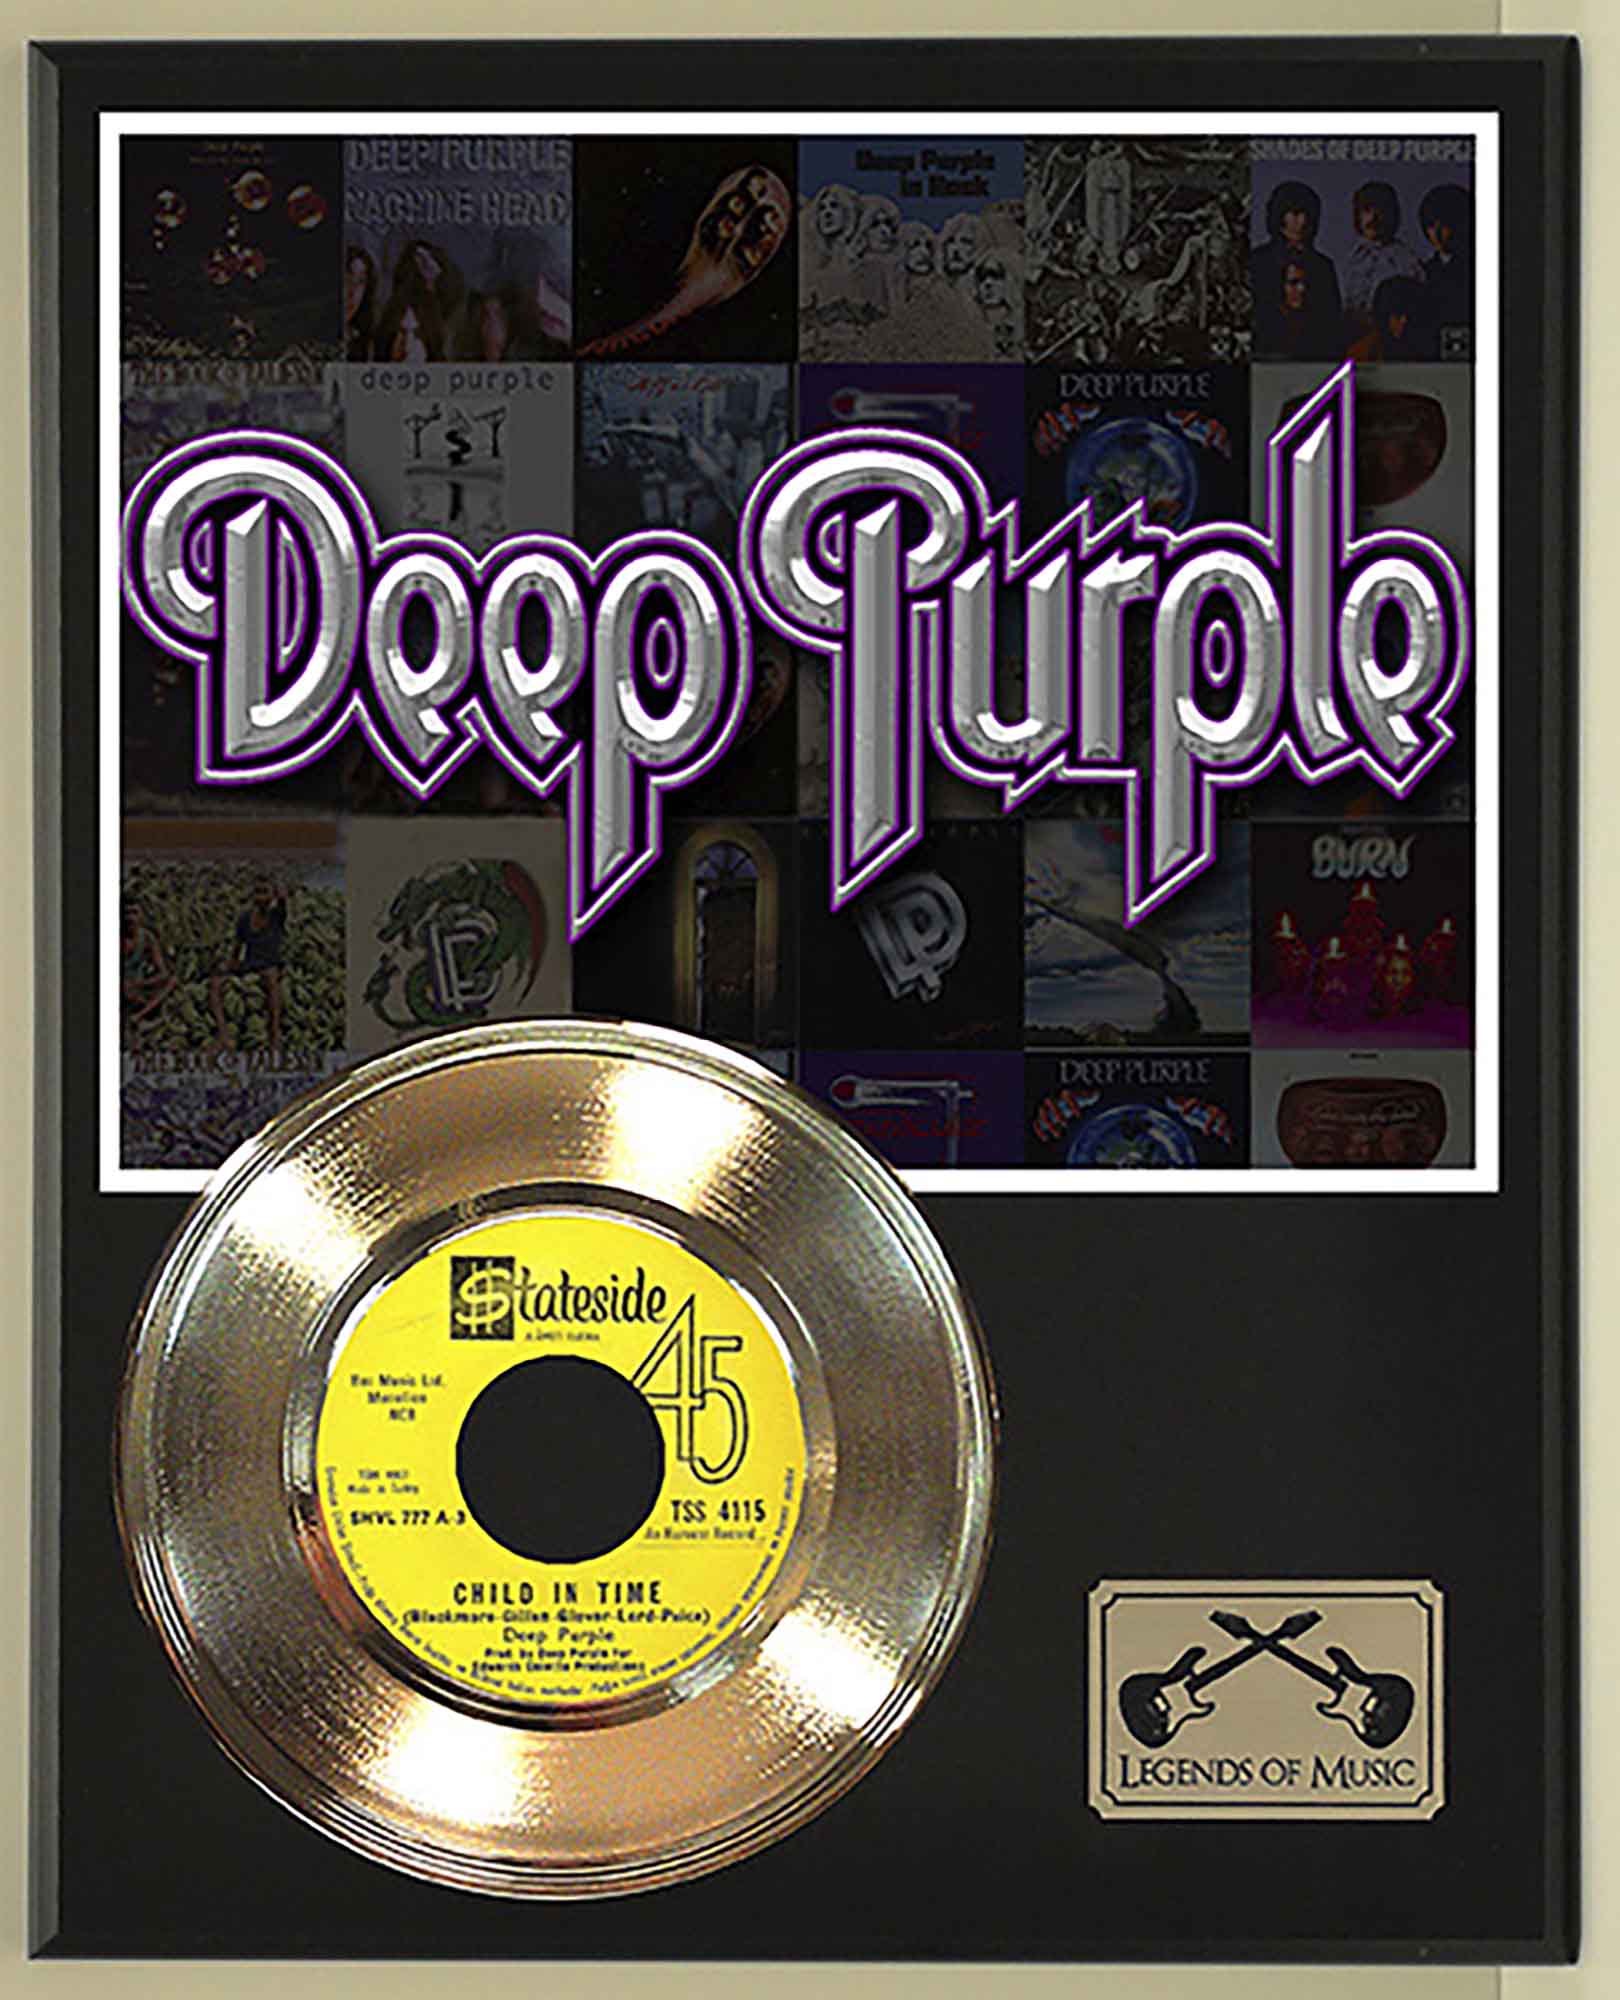 Deep Purple - Child In Time Gold 45 Record Ltd Edition Display Award  Quality - Gold Record Outlet Album and Disc Collectible Memorabilia